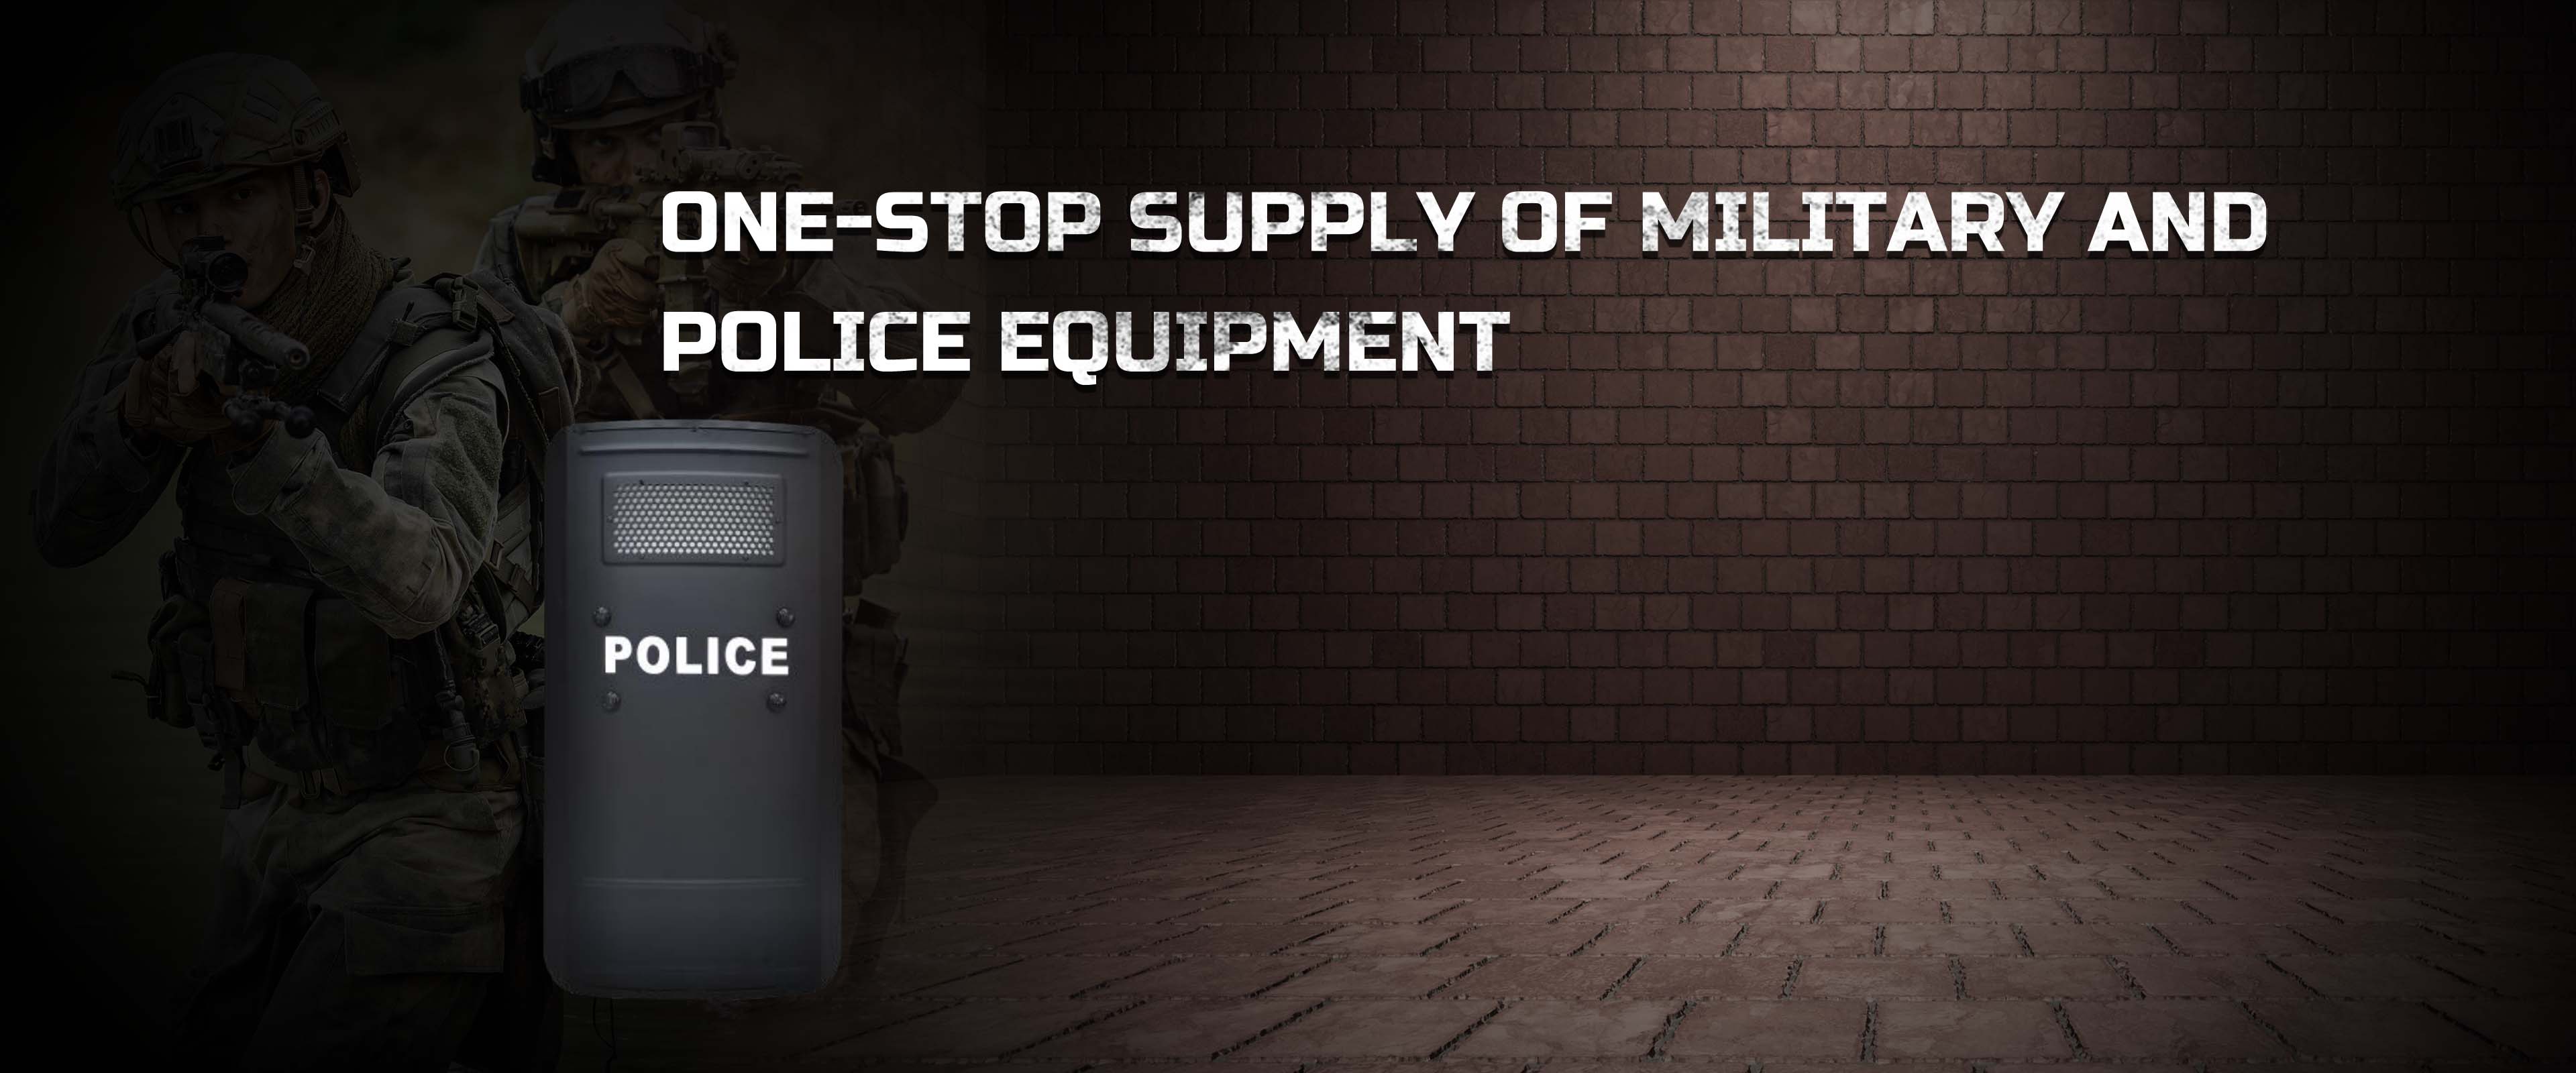 ONE-STOP SUPPLYOF MILITARY AND POLICE EOUIPMENT